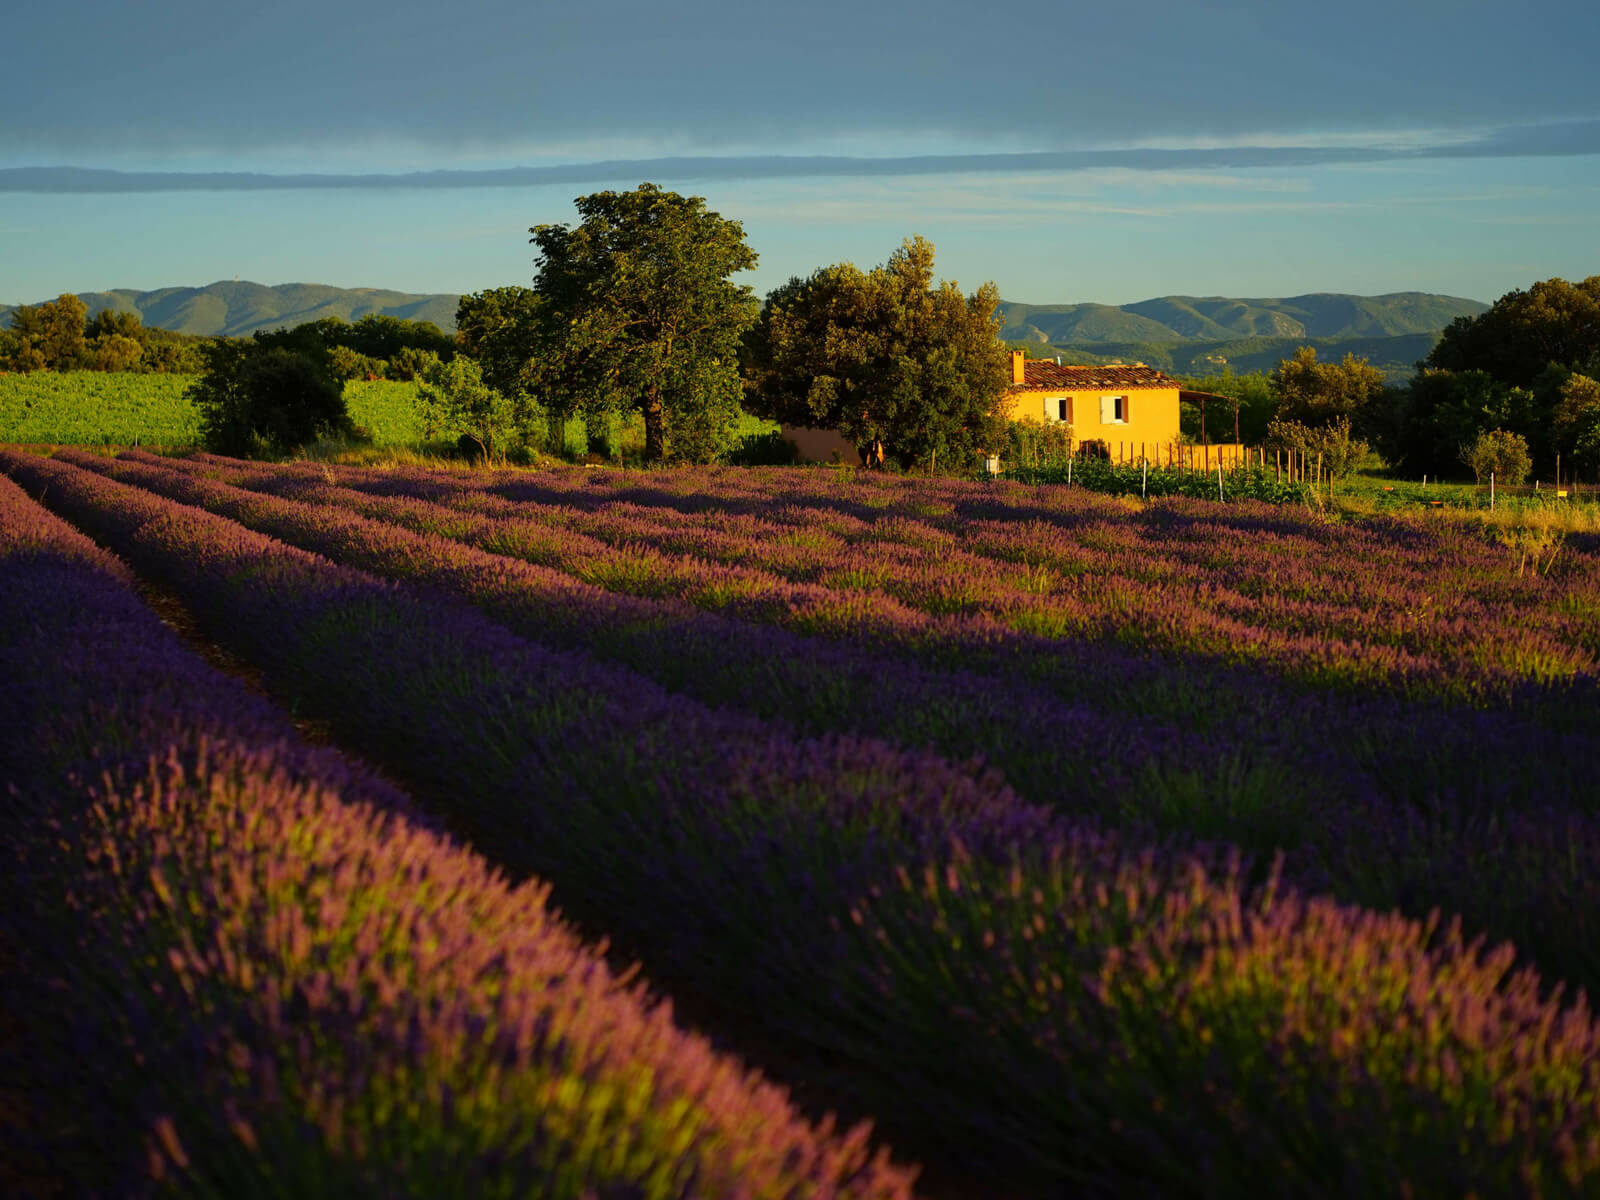 Lavender field at sunset with yellow house in the background